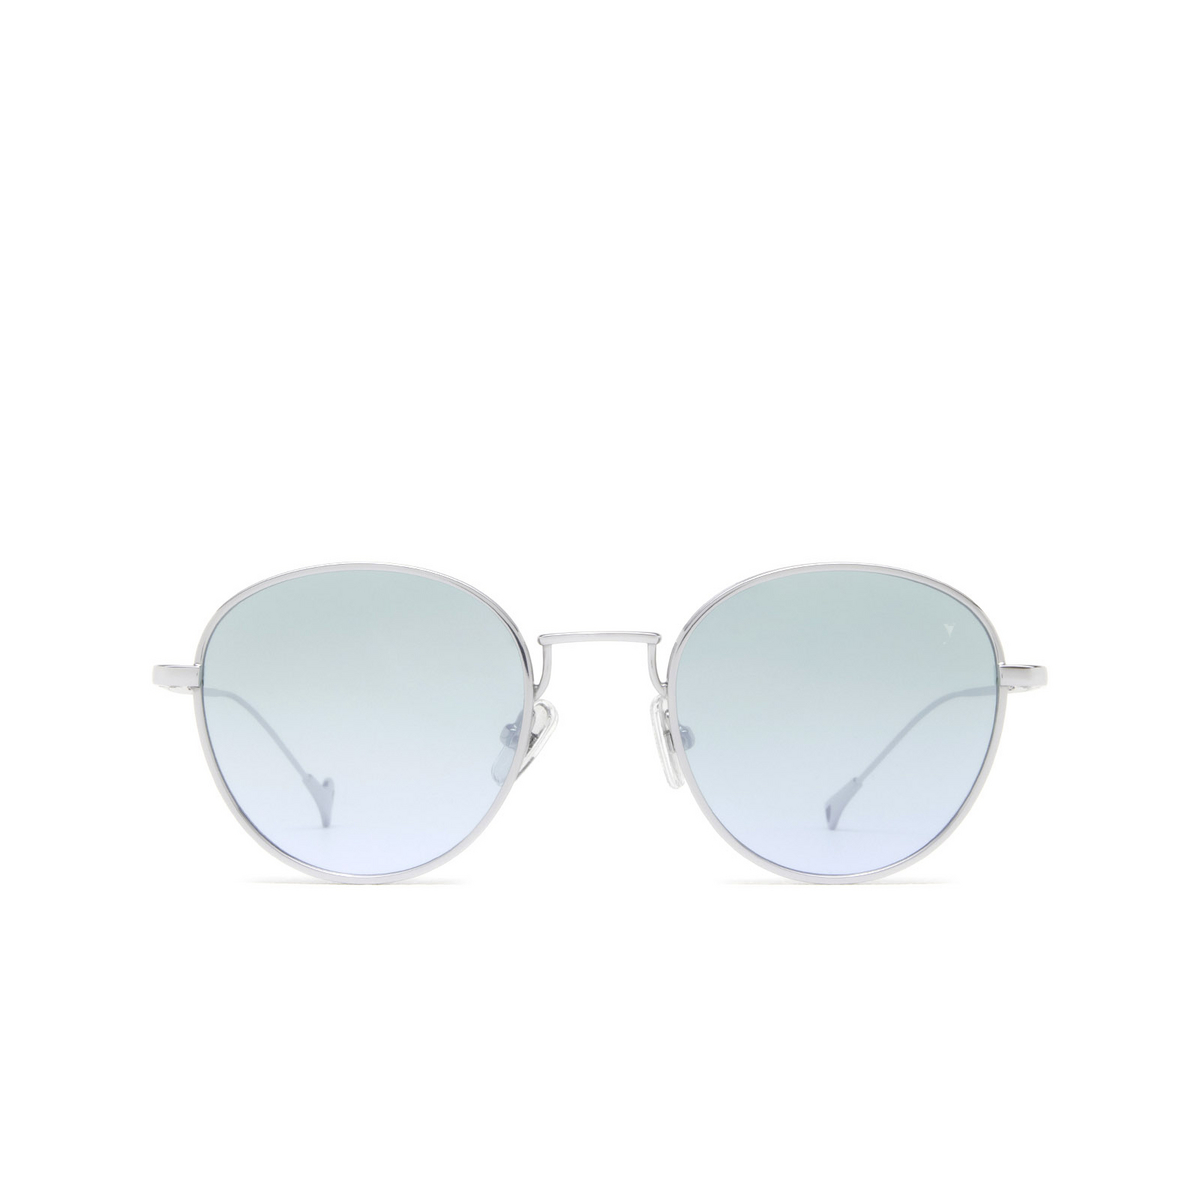 Eyepetizer® Round Sunglasses: Alen color Silver C.1-43F - front view.